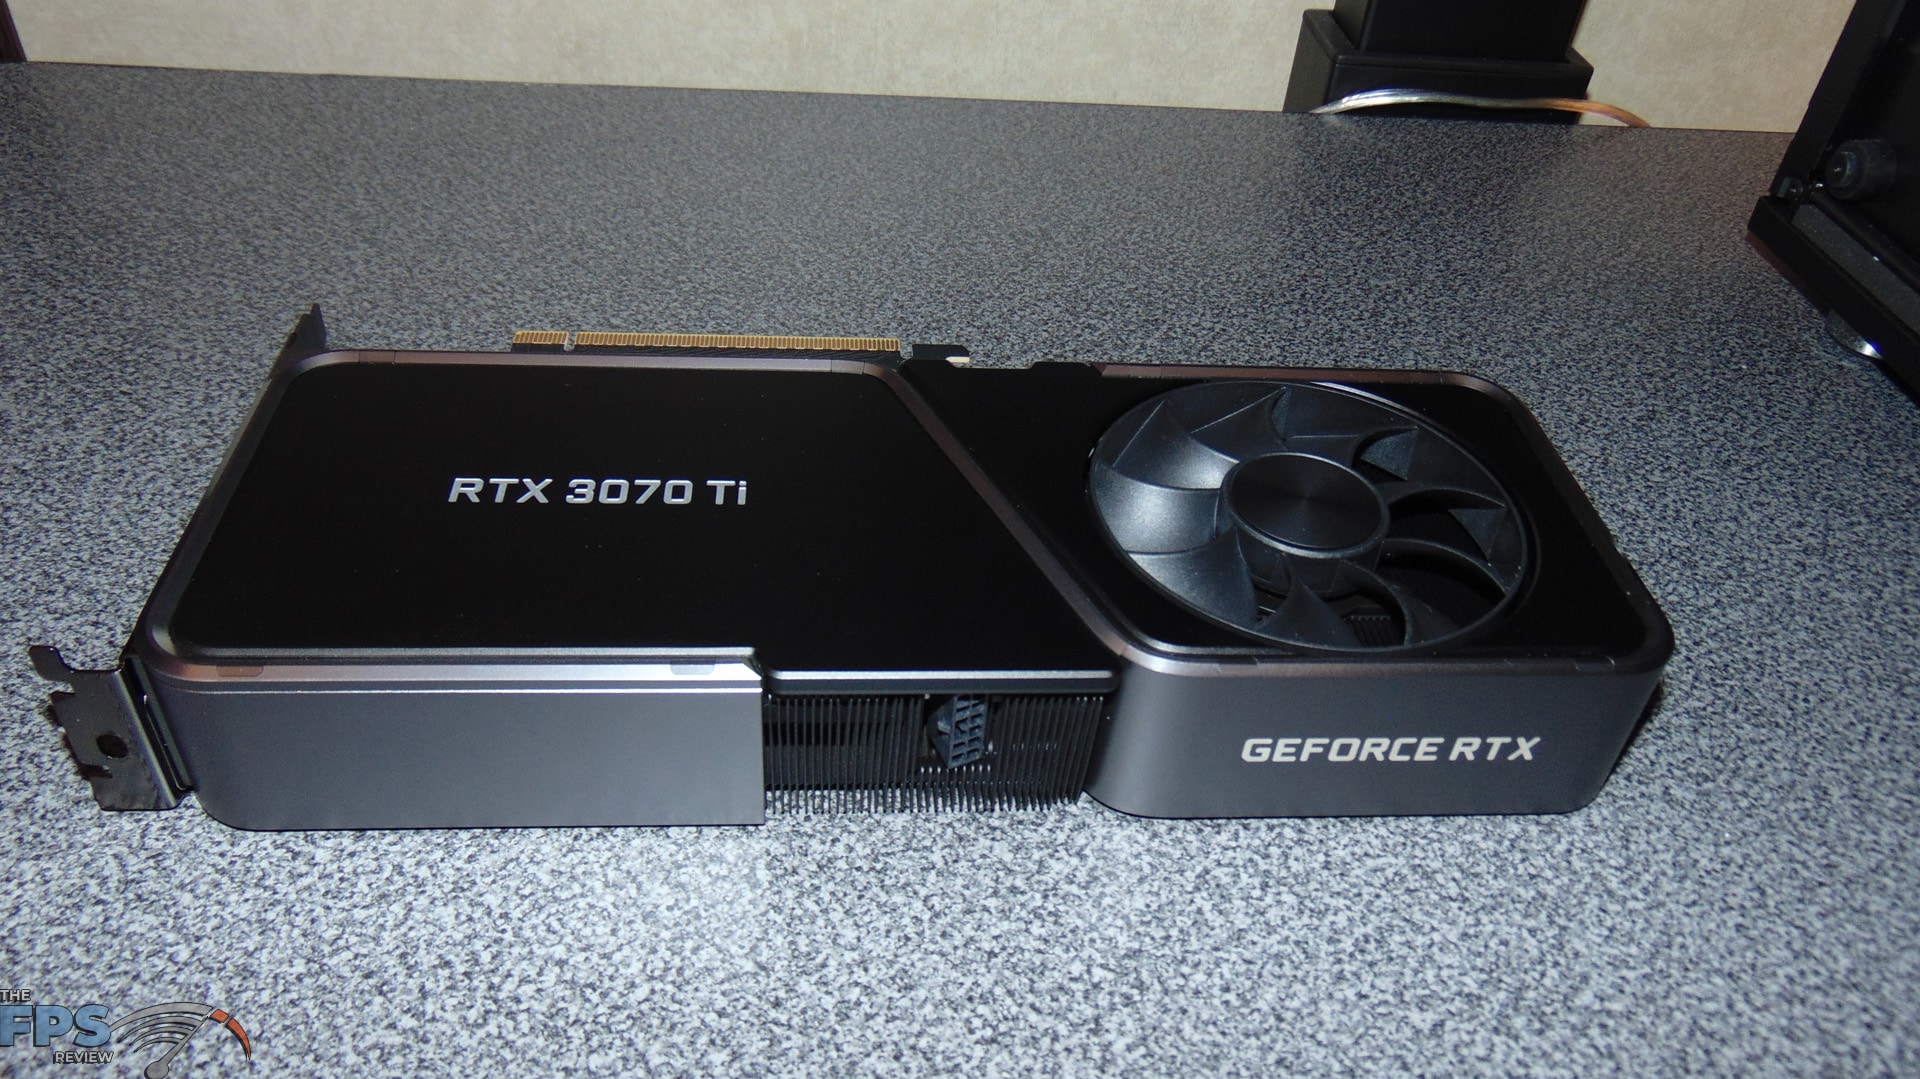 3070 founders edition. RTX 3070 ti founders Edition. GEFORCE GTX 3070 ti founders Edition. RTX 3070 ti Fe. NVIDIA RTX 3070 ti.